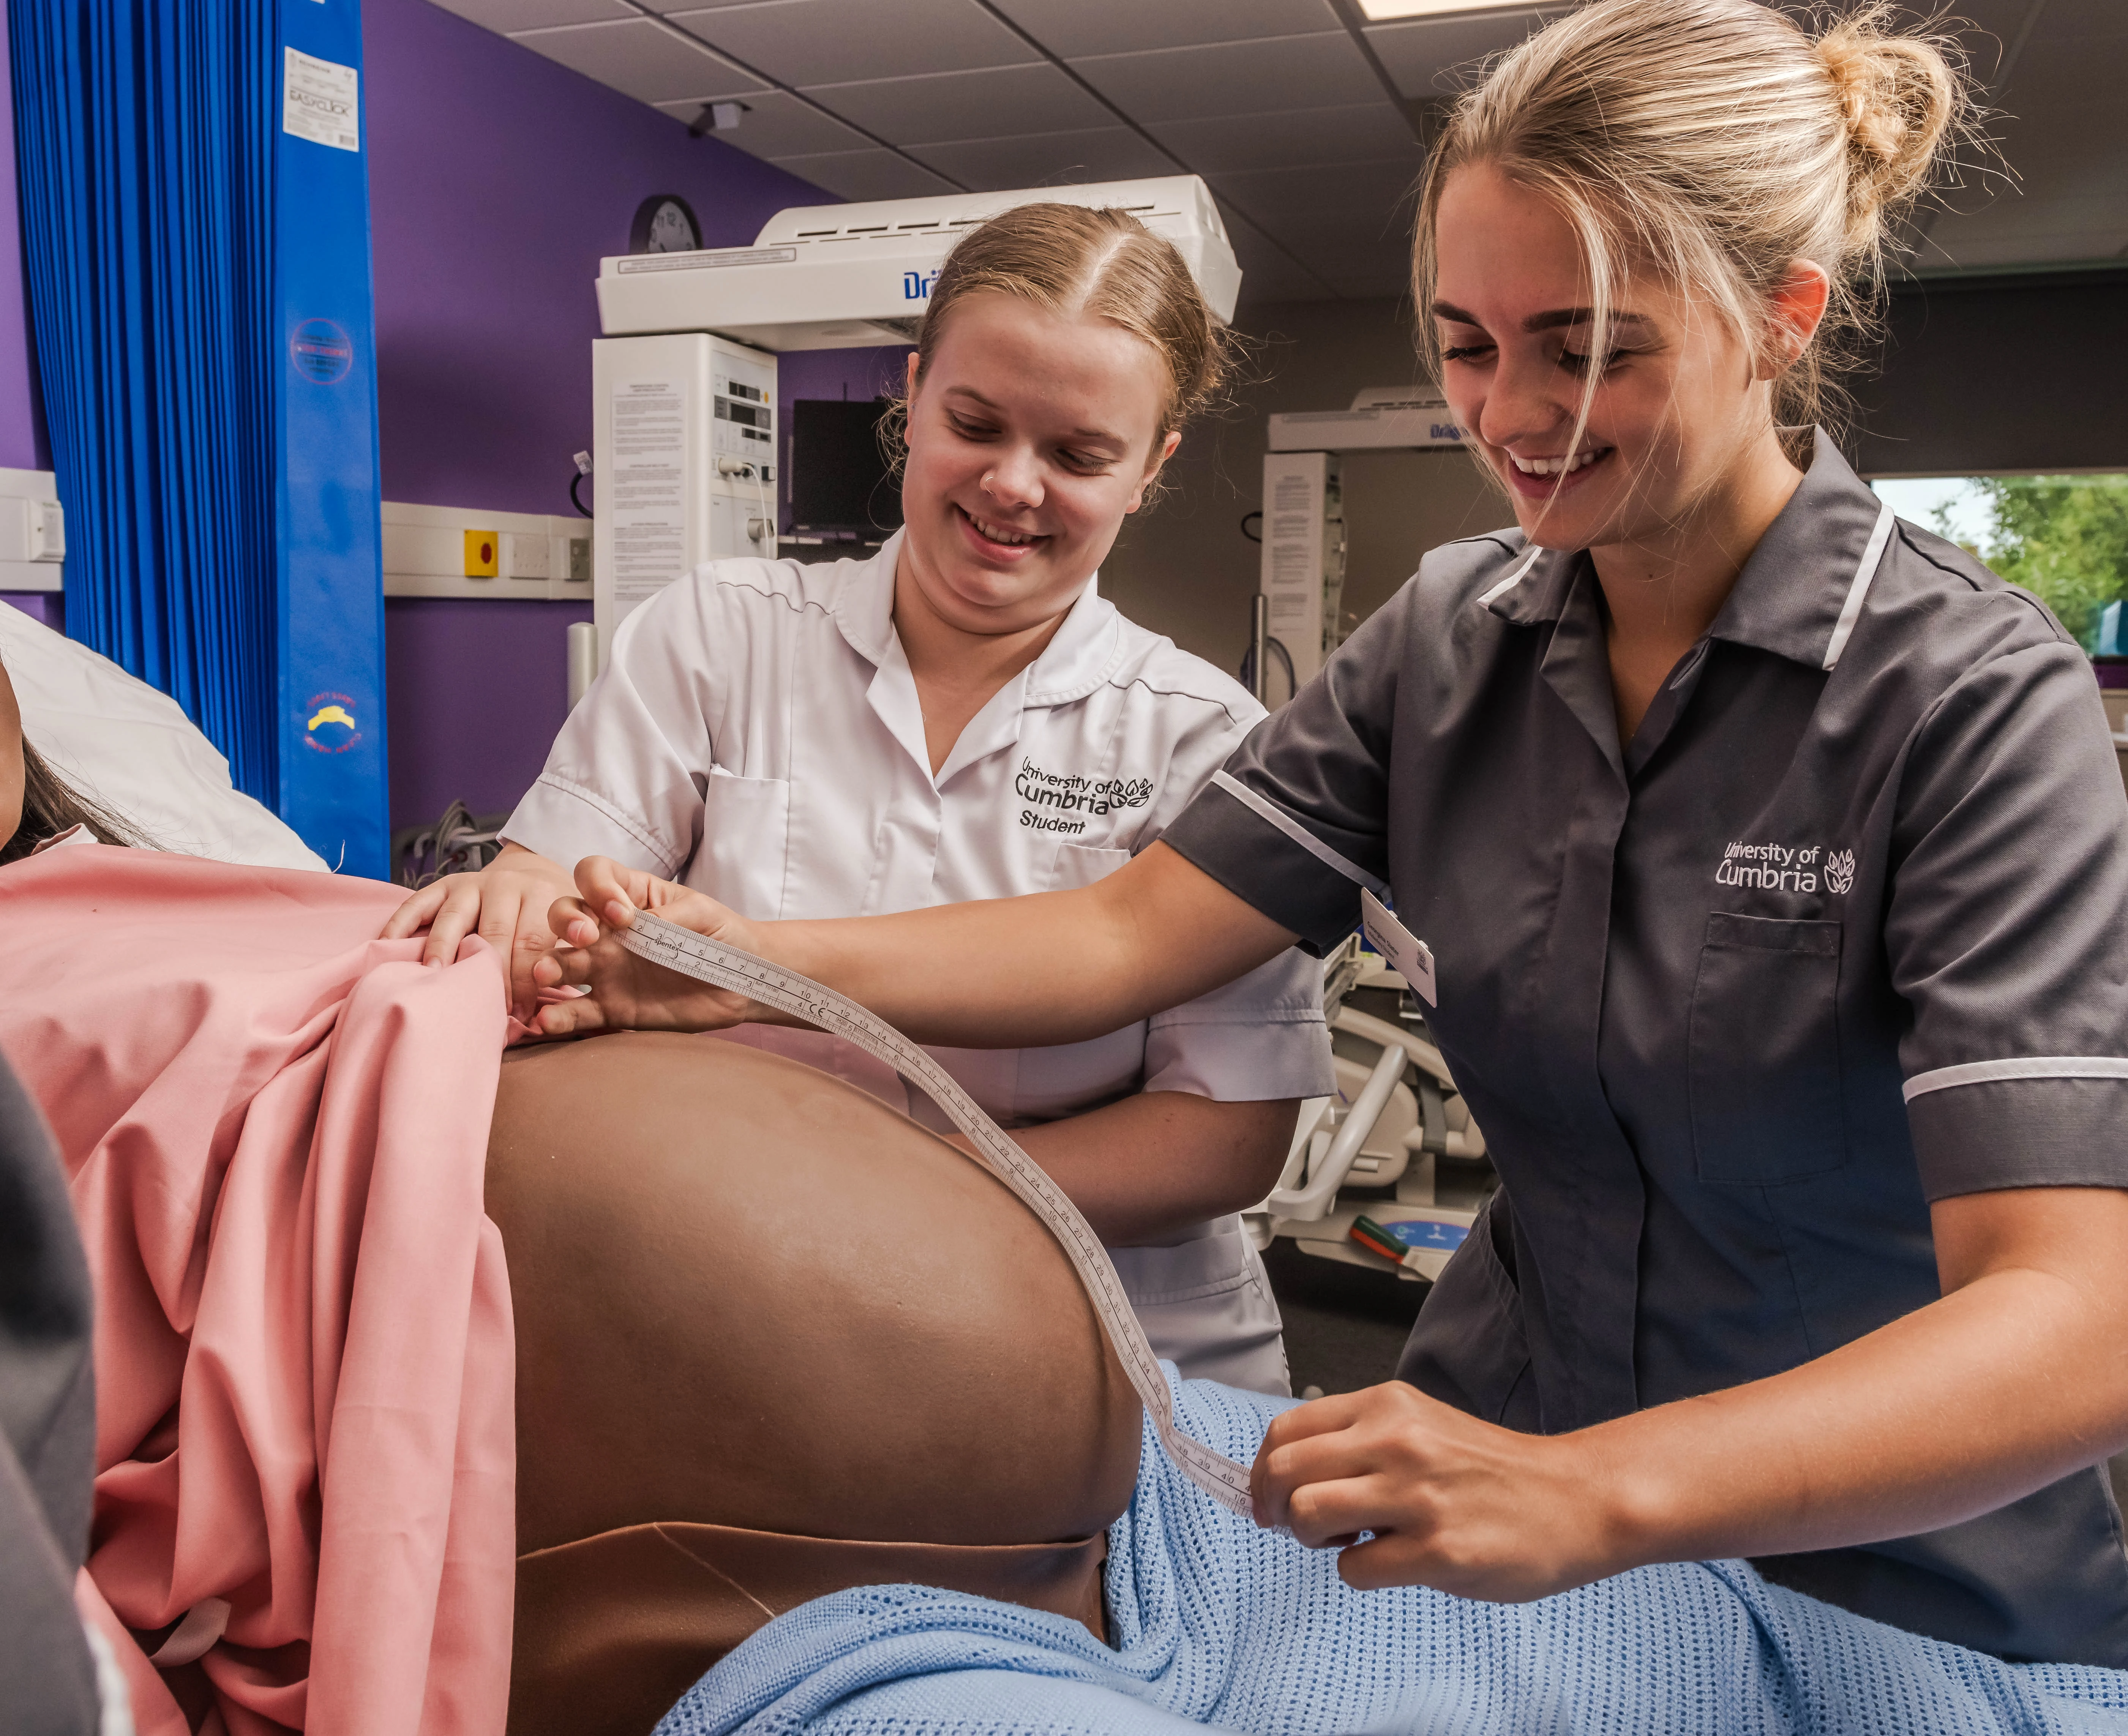 Trust's midwives to train using realistic birth simulator